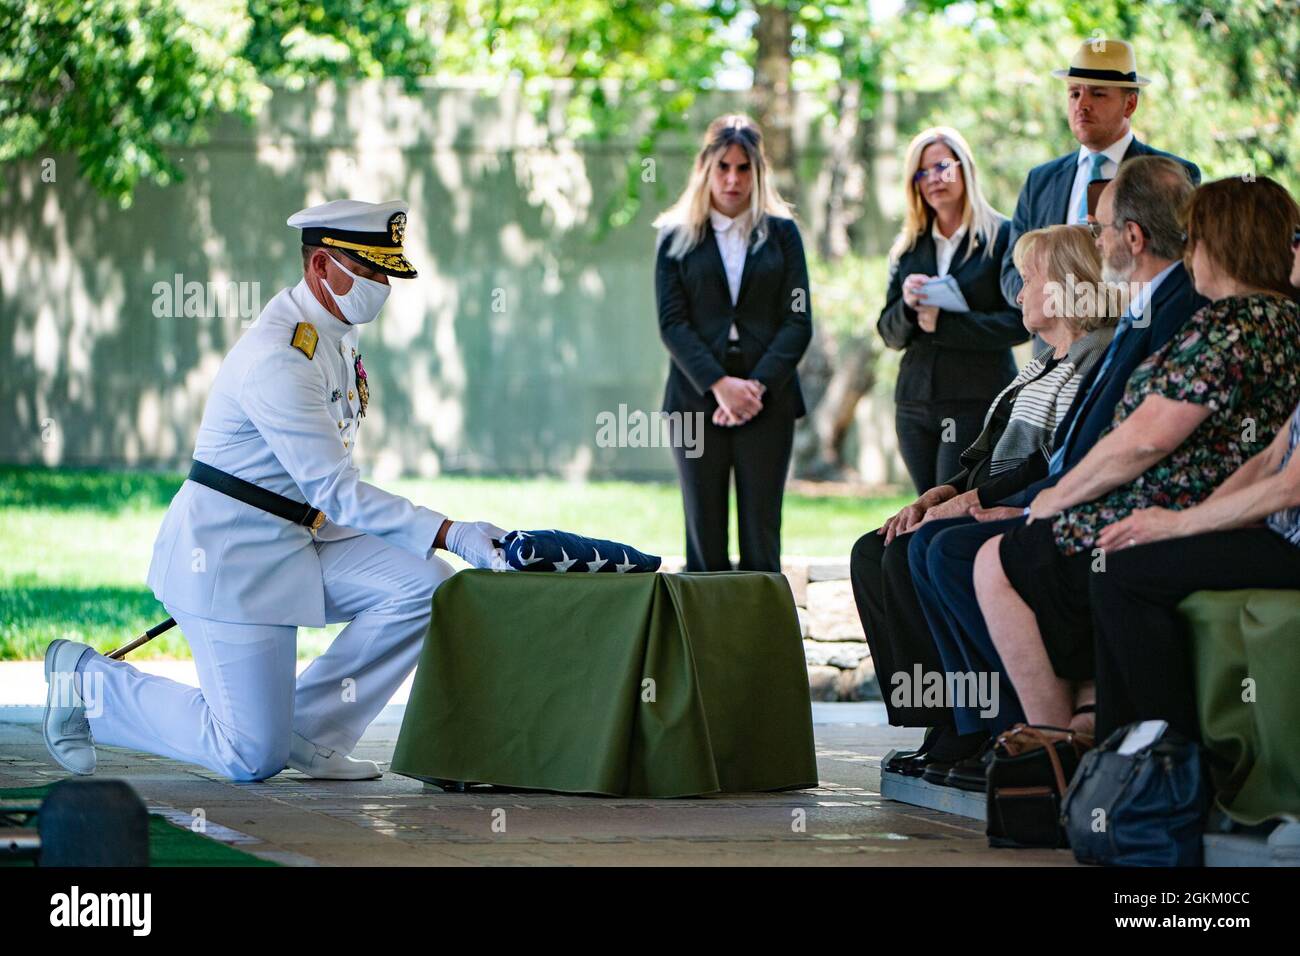 The U.S. flag is presented to Betty Joe Griffith Price at the conclusion of the funeral service for her brother, U.S. Navy Radioman 3rd Class Thomas Griffith, in Section 60 of Arlington National Cemetery, Arlington, Virginia, May 21, 2021.     Griffith was assigned to the battleship USS Oklahoma, which was moored at Ford Island, Pearl Harbor when it was attacked by Japanese aircraft on Dec. 7, 1941 during World War II. The USS Oklahoma sustained multiple torpedo hits, which caused it to quickly capsize. The attack on the ship resulted in the deaths of 429 crewmen, including Griffith, who was 2 Stock Photo